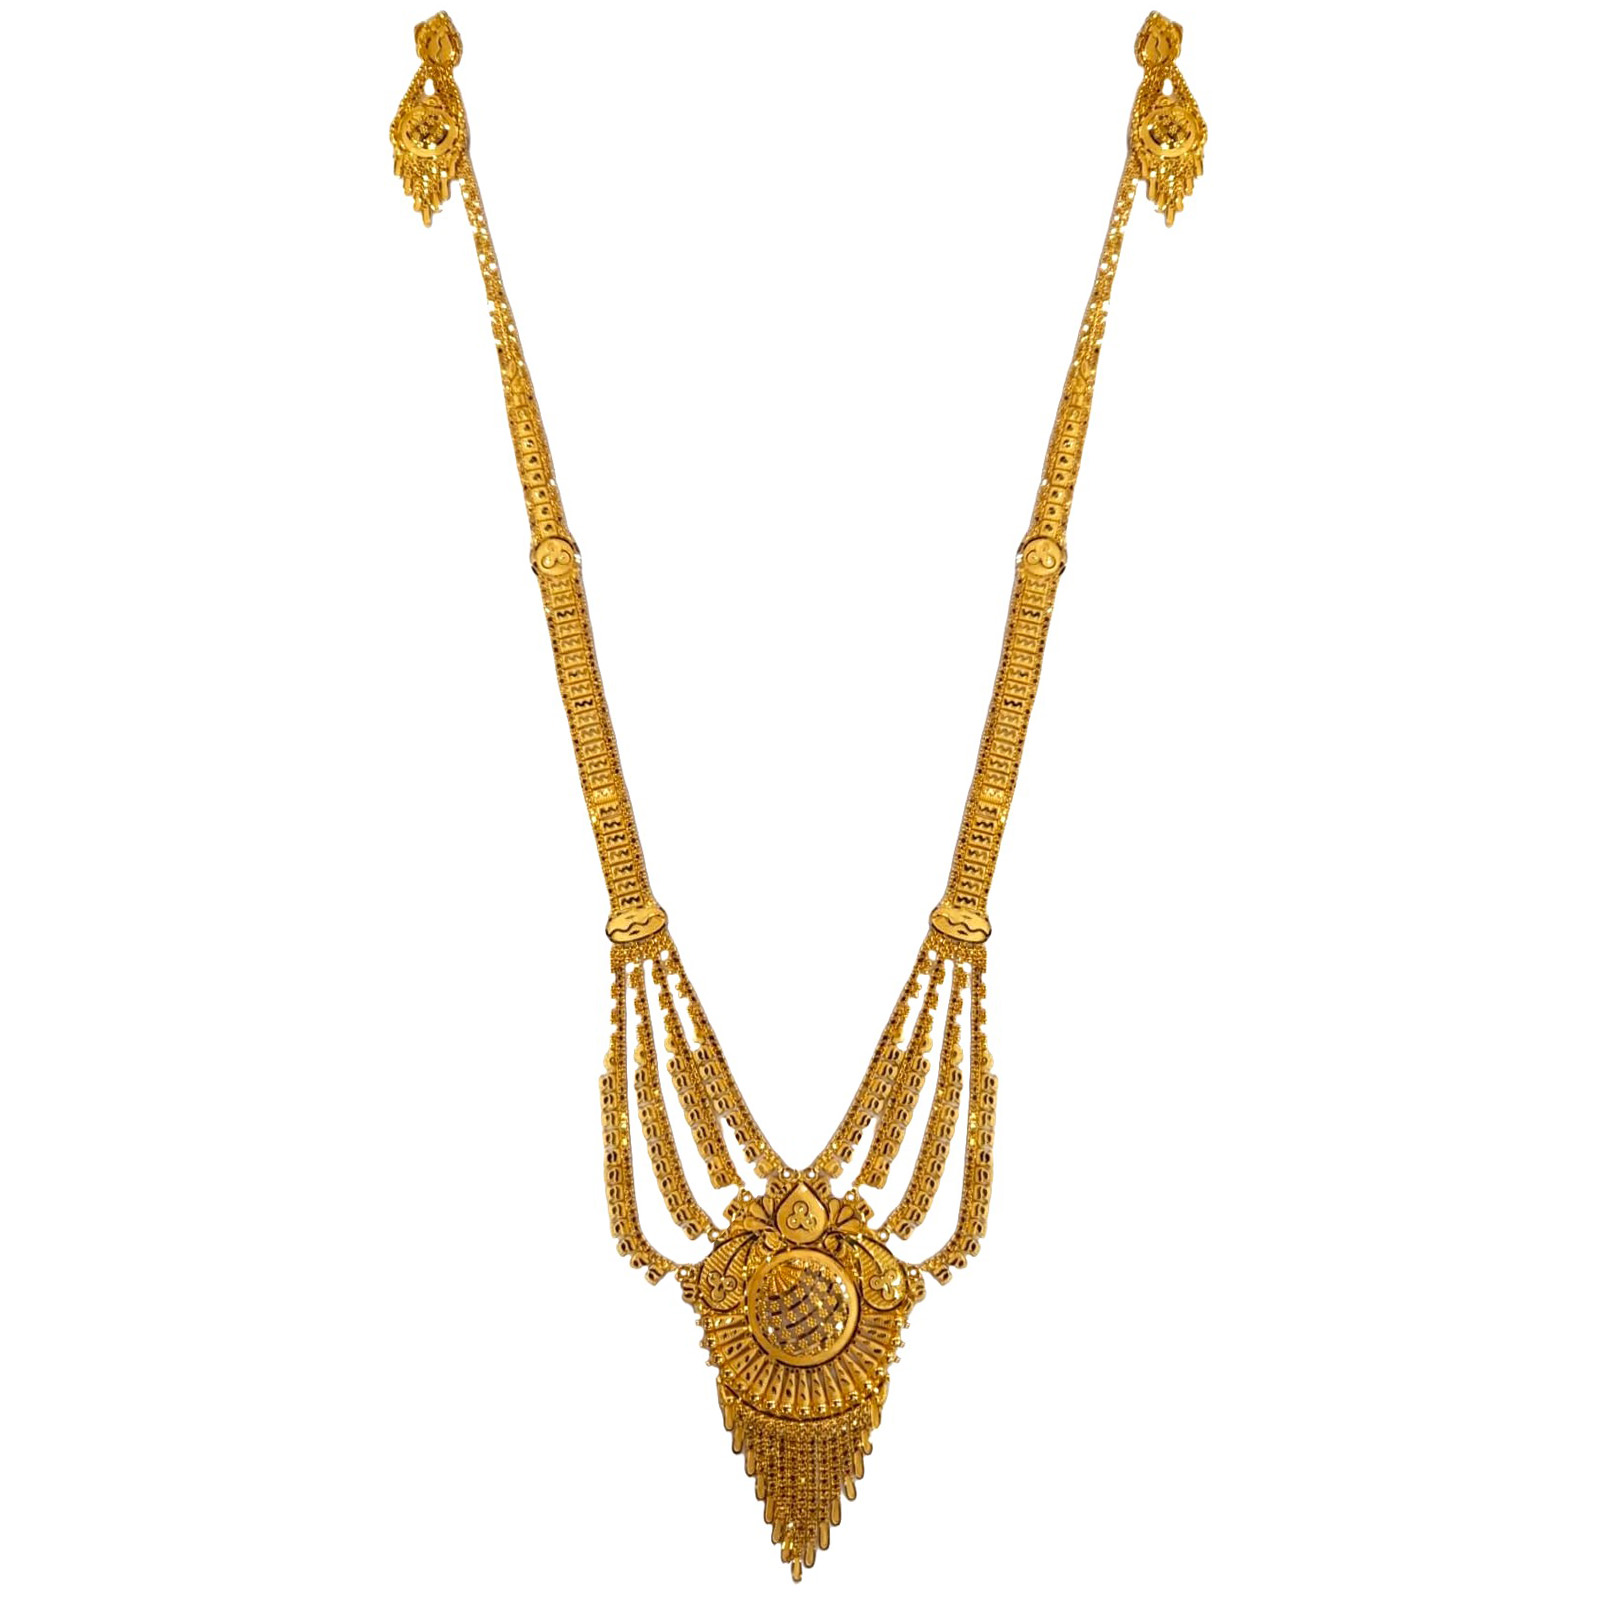 Long Gold Necklace - Buy Long Gold Necklace Designs Online at Best Prices  in India | Flipkart.com